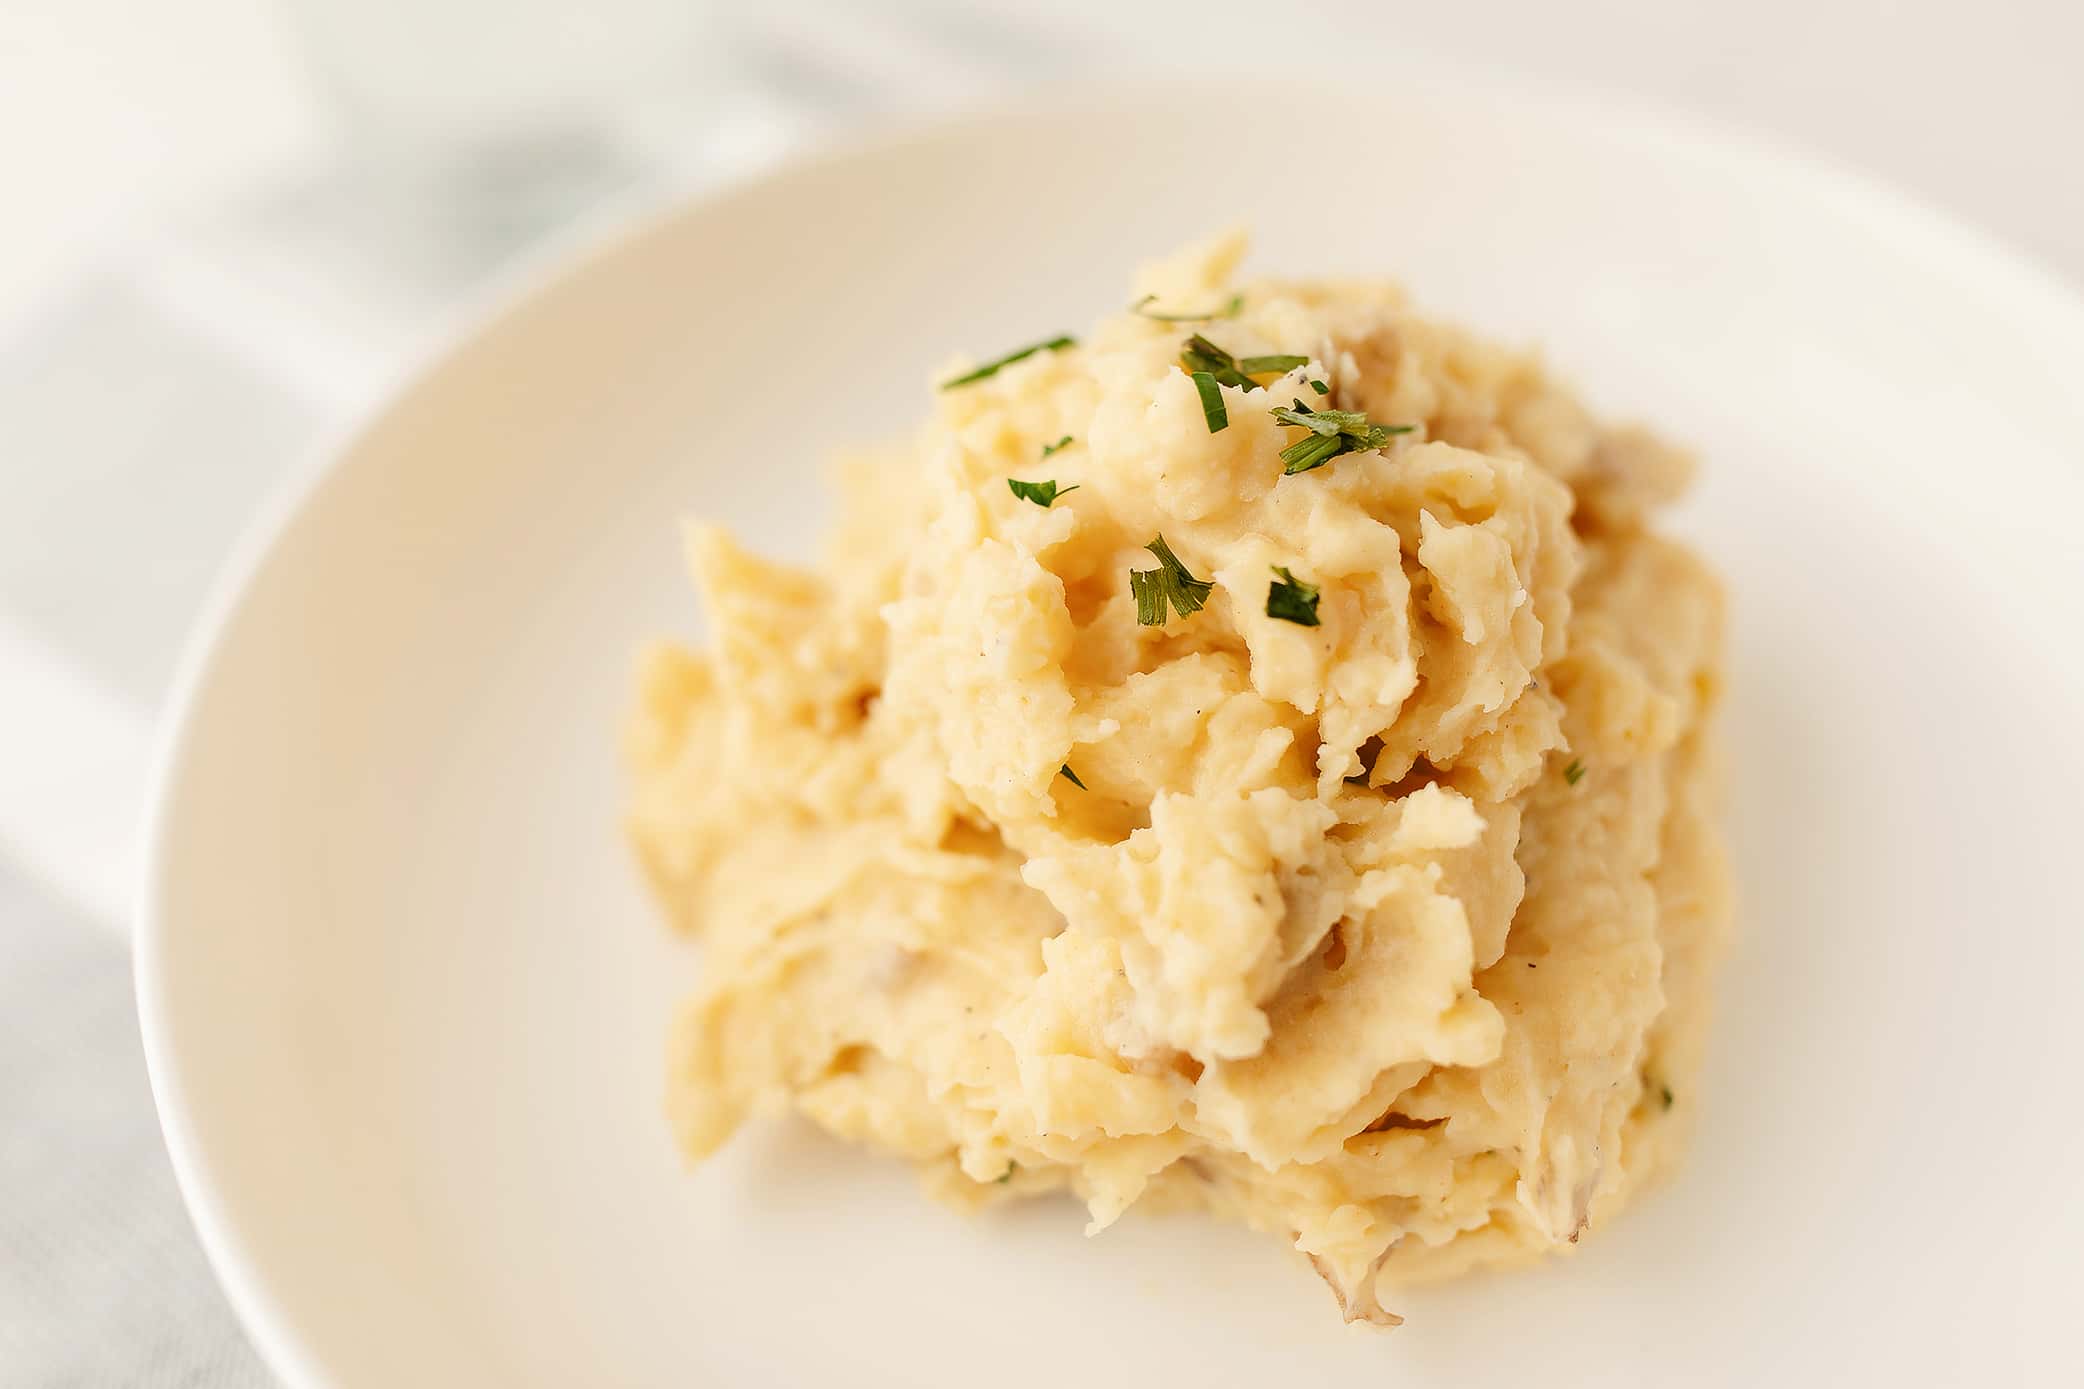 simple mashed potatoes made by Avon Prime Meats' chefs